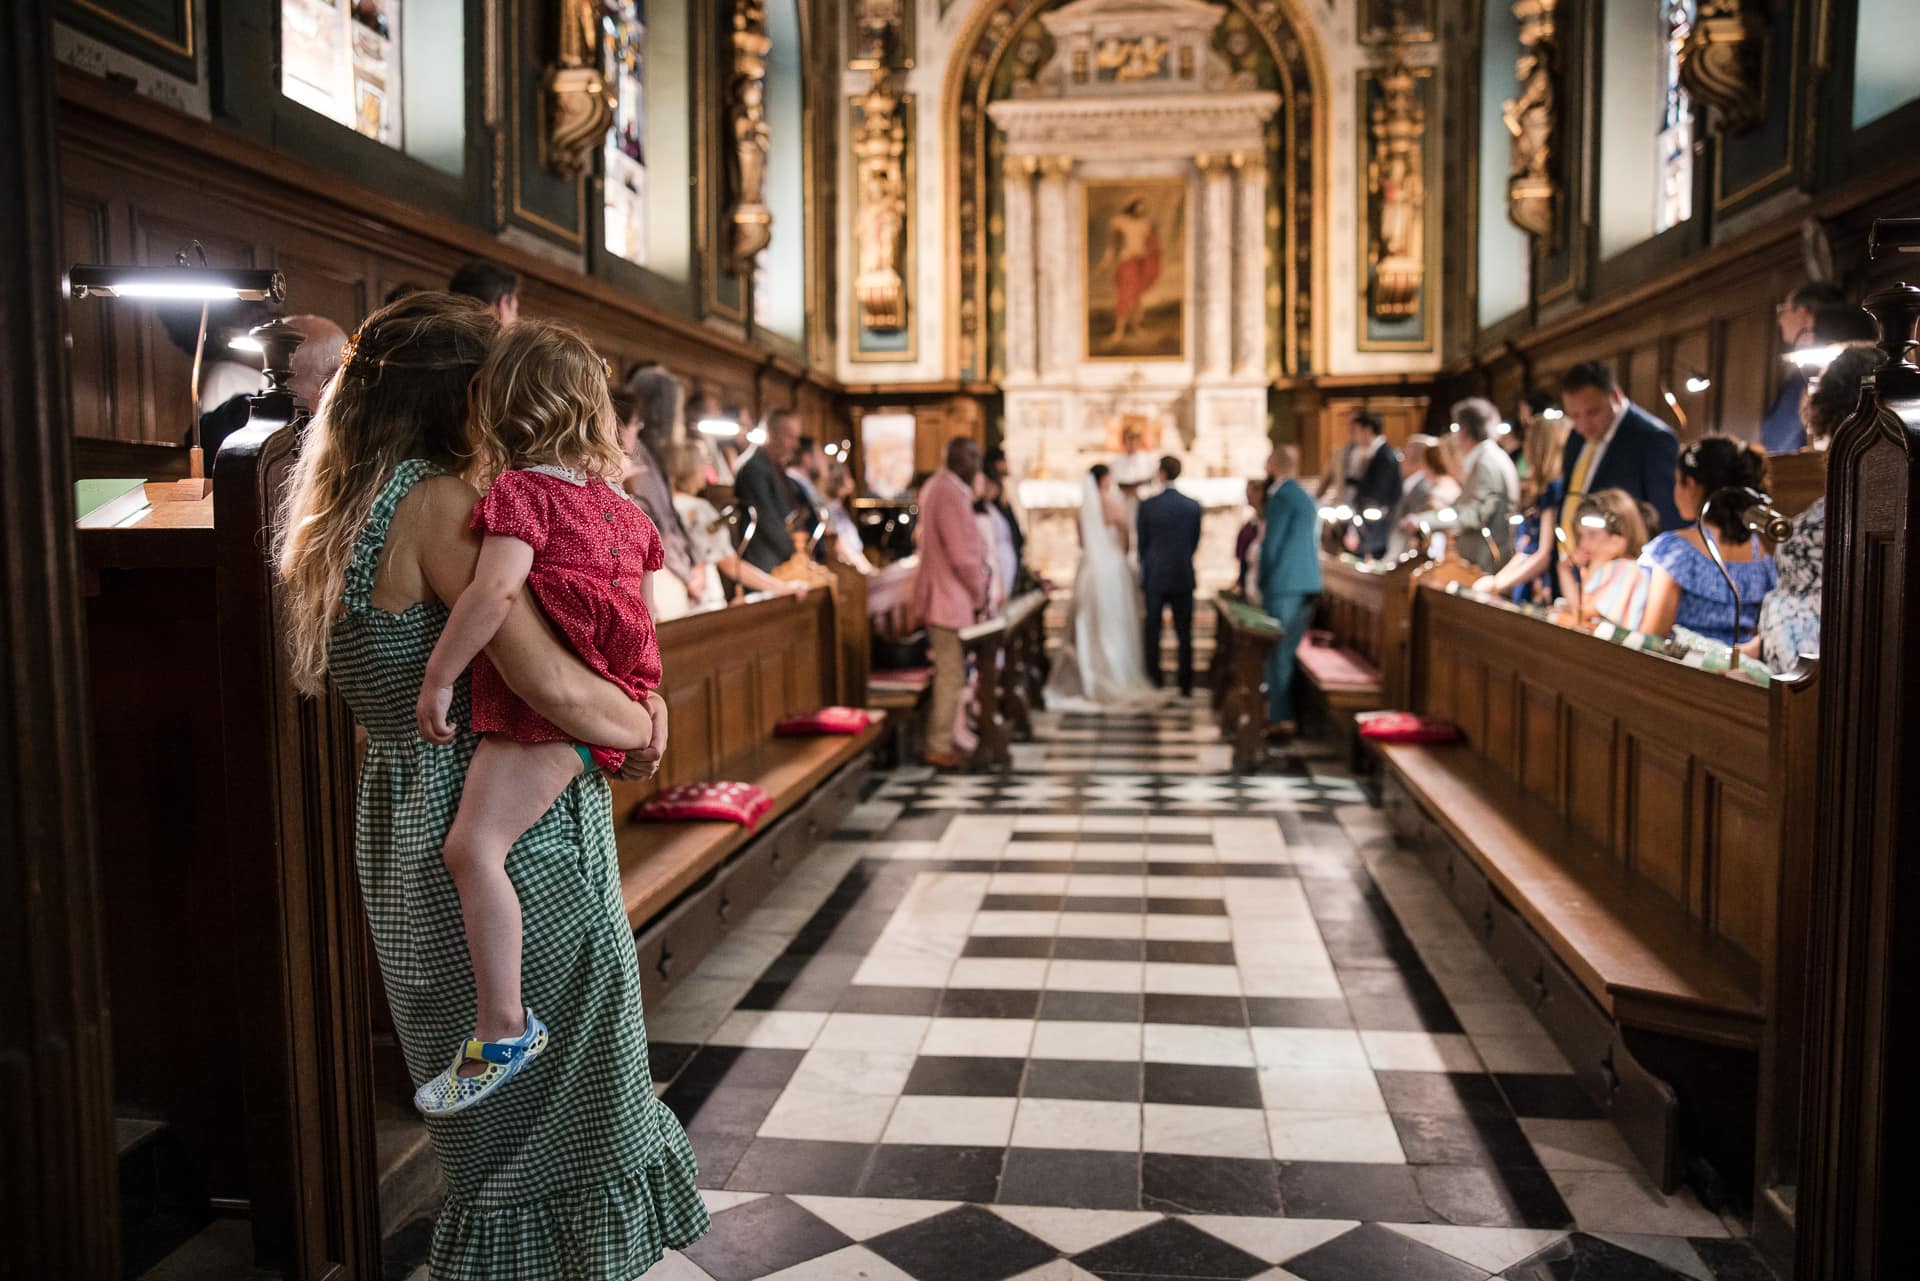 A mother and young child look on at the wedding in the Damon Wells Chapel at Pembroke College